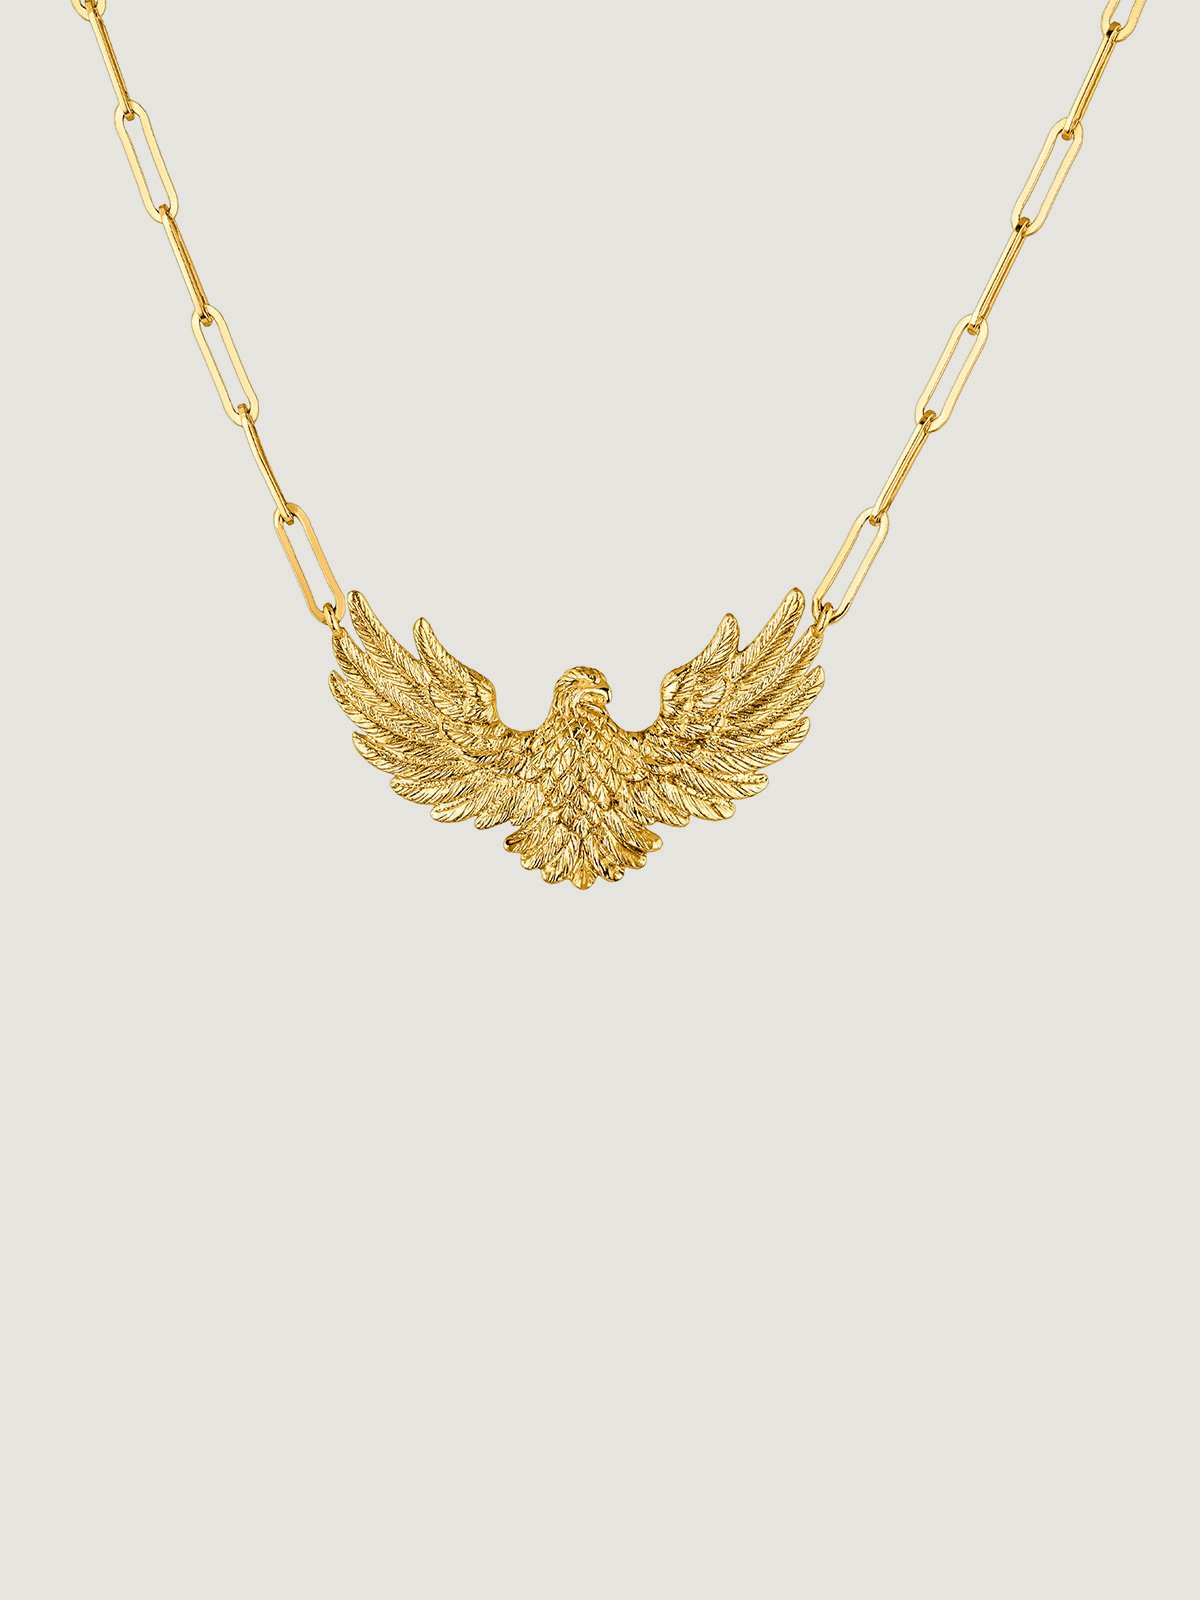 925 Silver link necklace bathed in 18K yellow gold with eagle